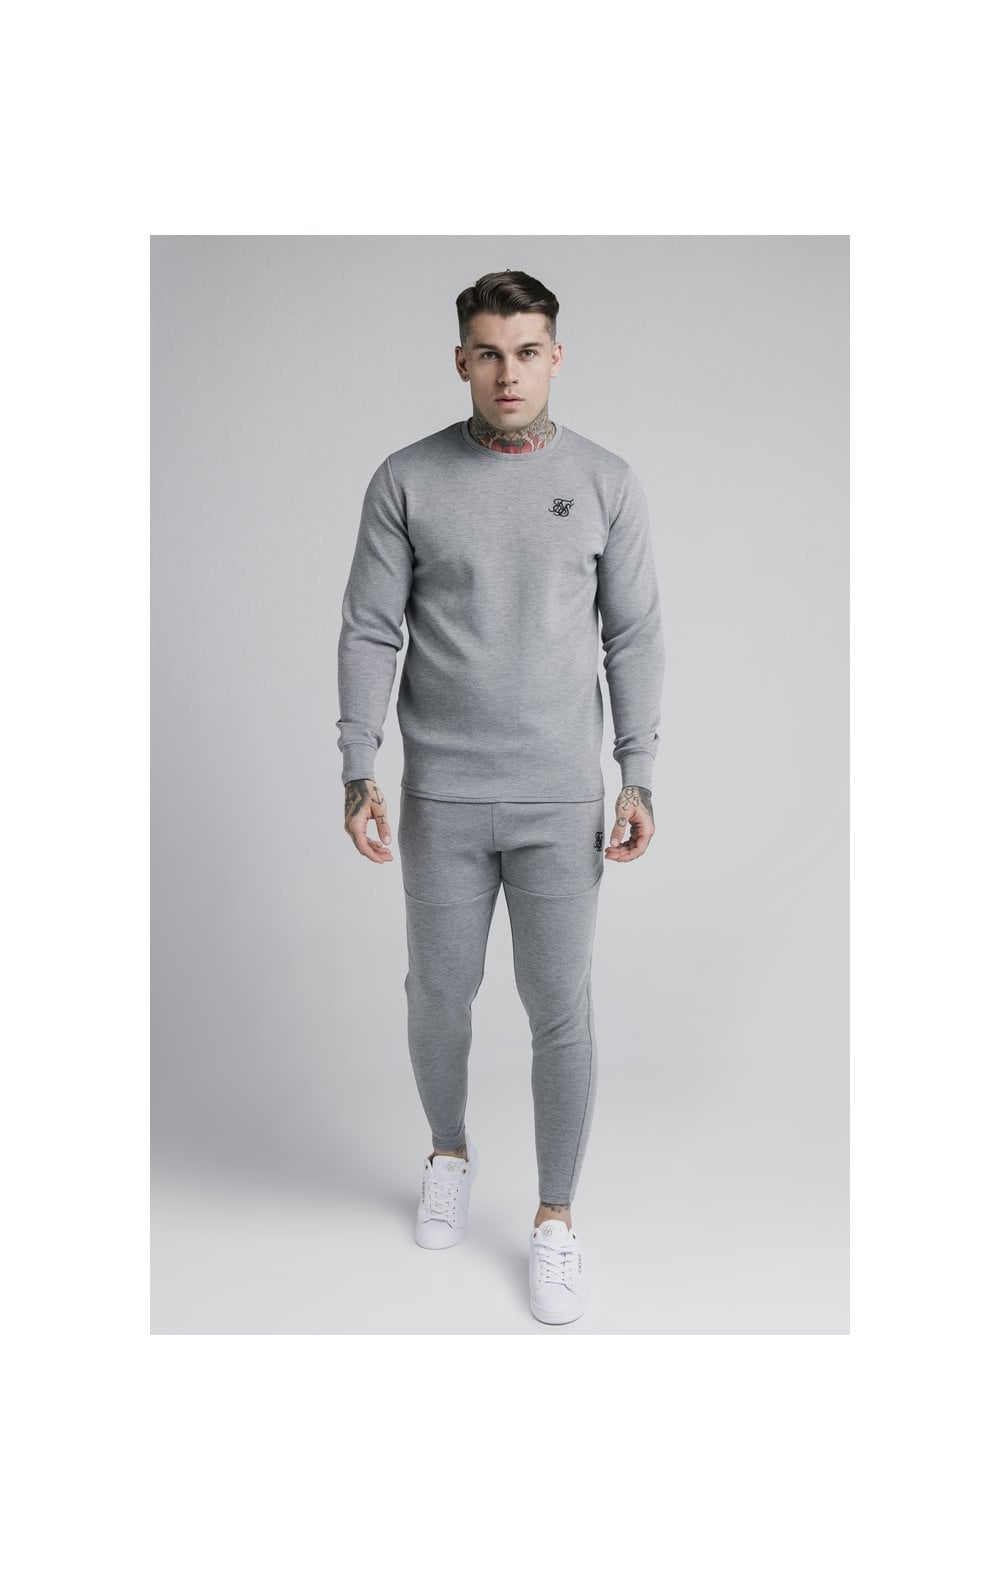 Load image into Gallery viewer, SikSilk L/S Exhibit Sweater - Grey Marl (4)